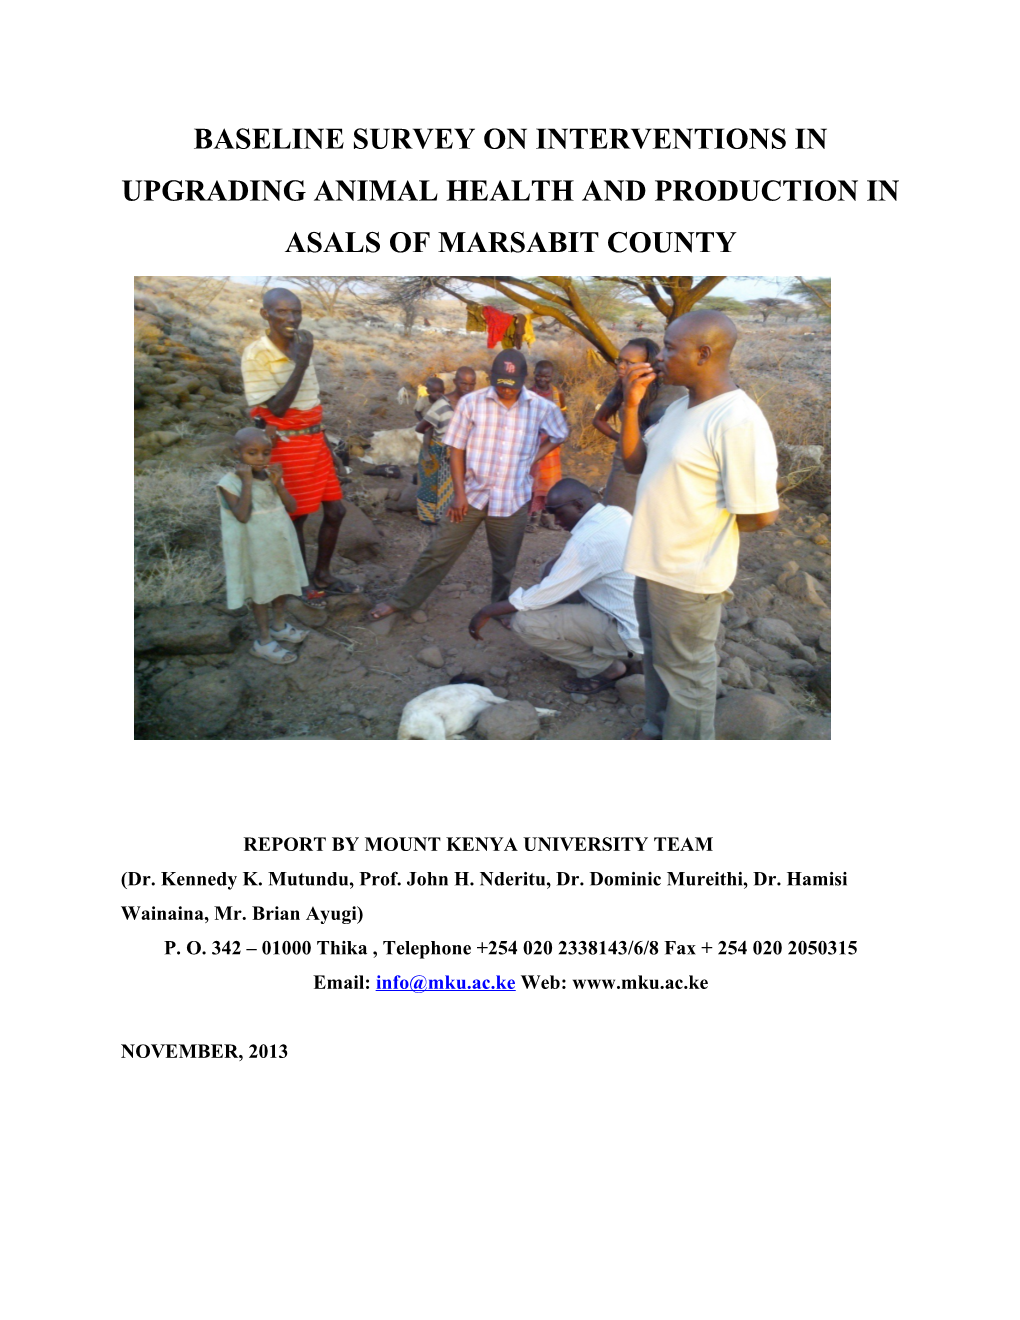 Baseline Survey on Interventions in Upgrading Animal Health and Production in Asals Of